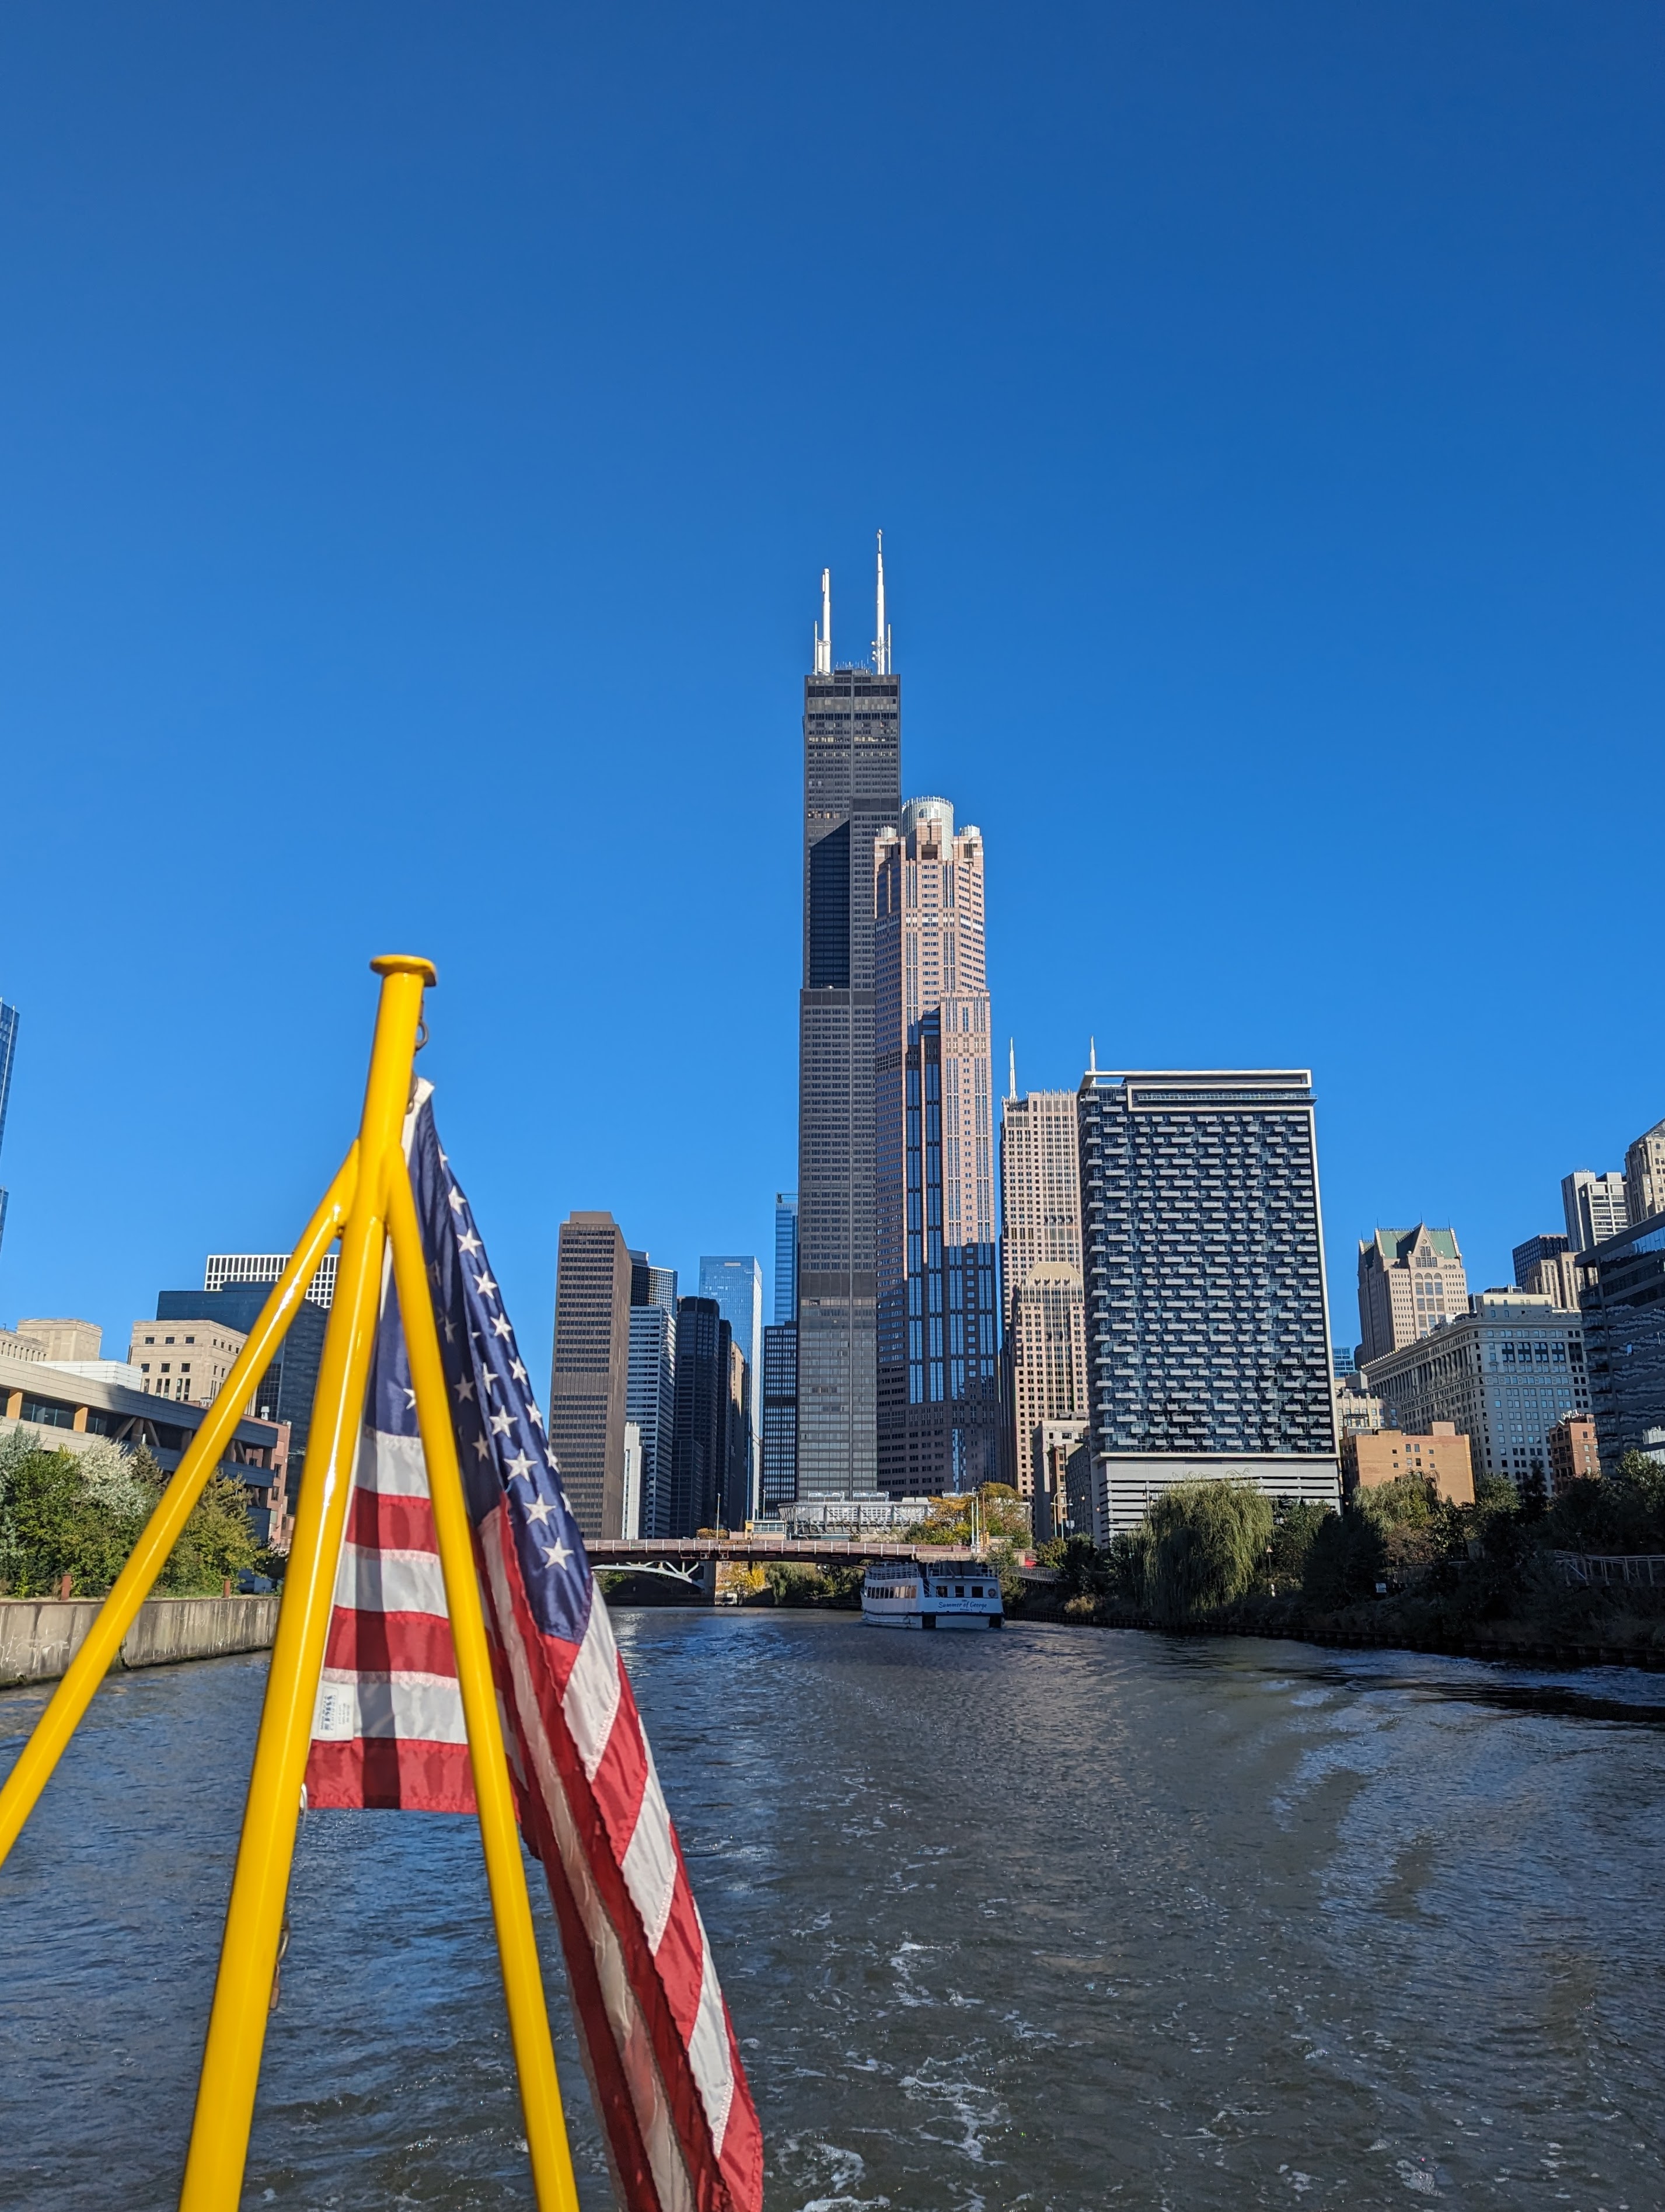 The skyline of Chicago as seen from the south branch of the Chicago river. The sears tower sits front and center. In the foreground is an American flag, as this shot was taken on the back of a boat.